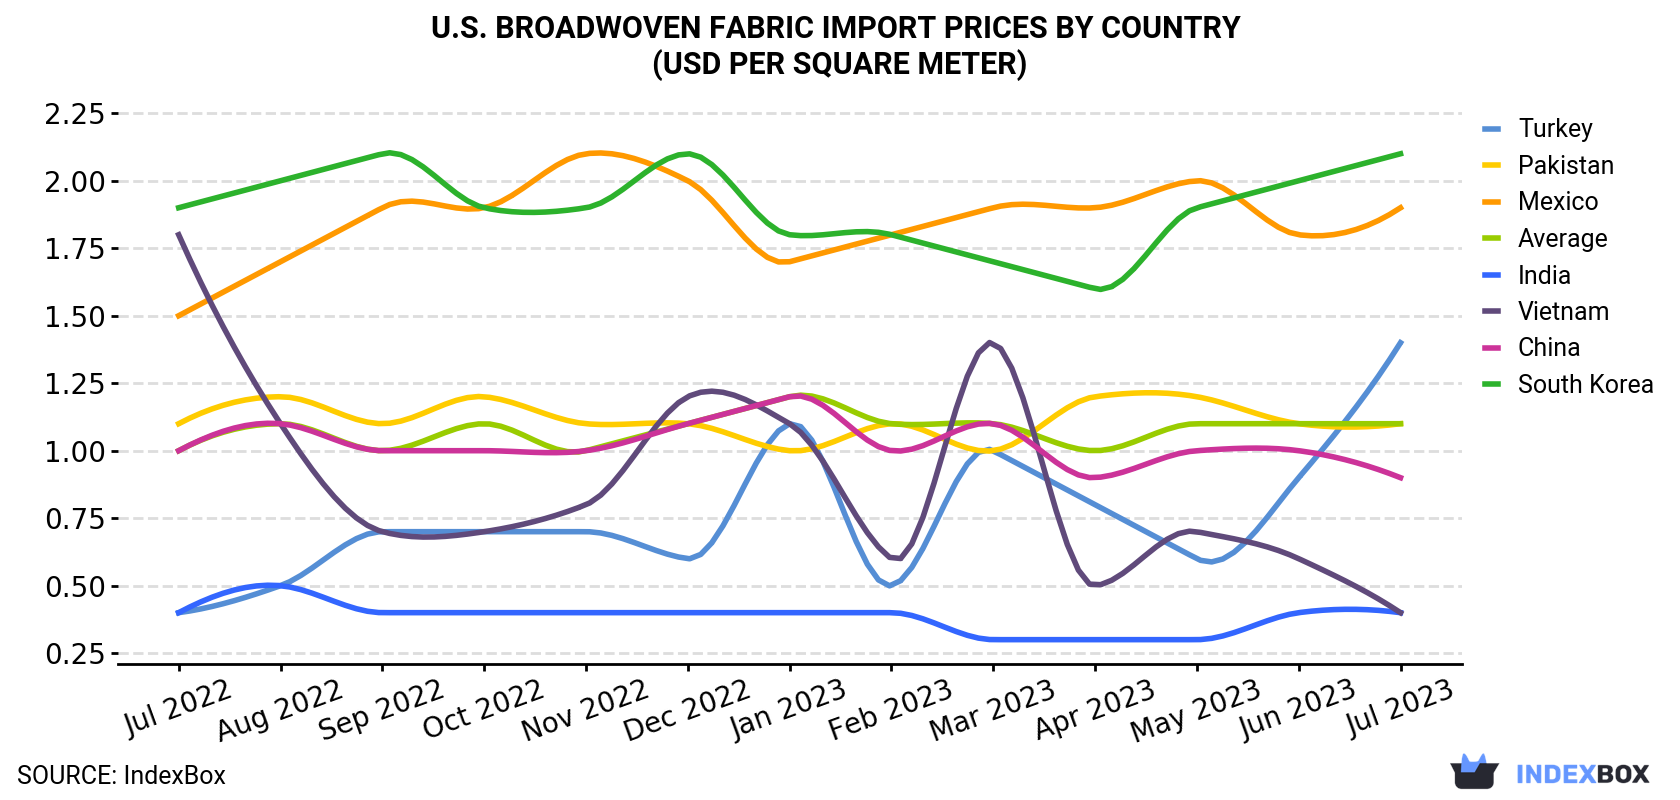 U.S. Broadwoven Fabric Import Prices By Country (USD Per Square Meter)